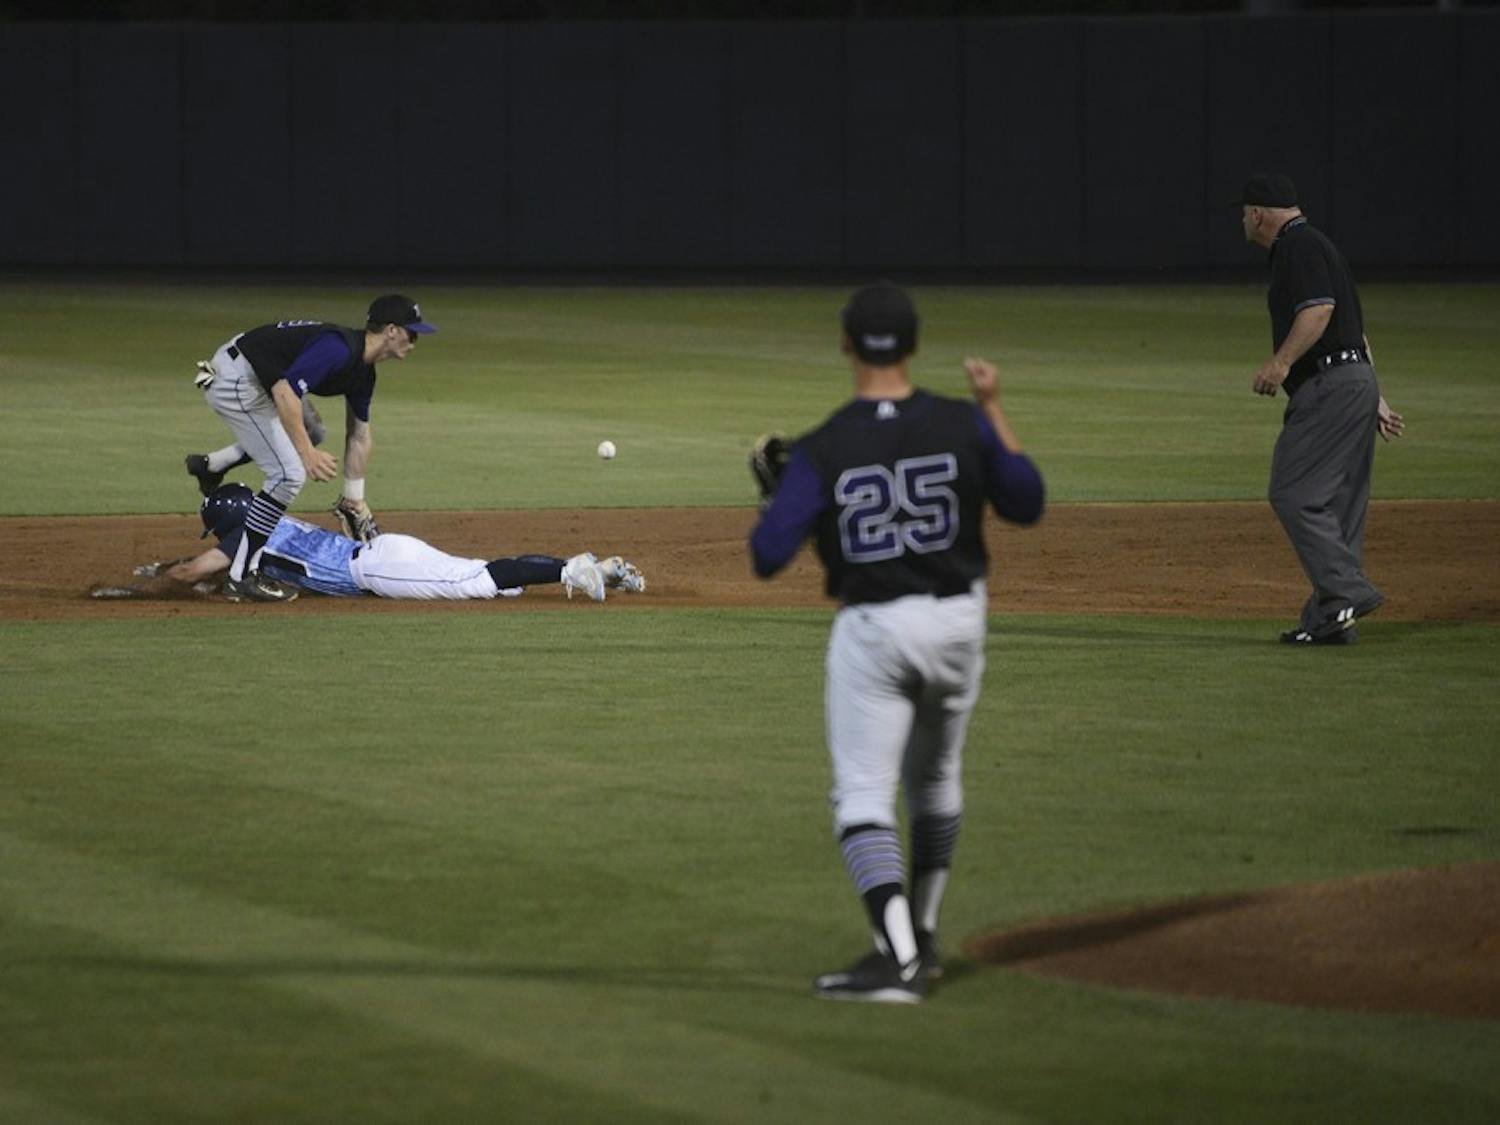 UNC sophomore Tyler Ramirez (14) safely steals second after knocking the ball lose in Tuesday's game against High Point.